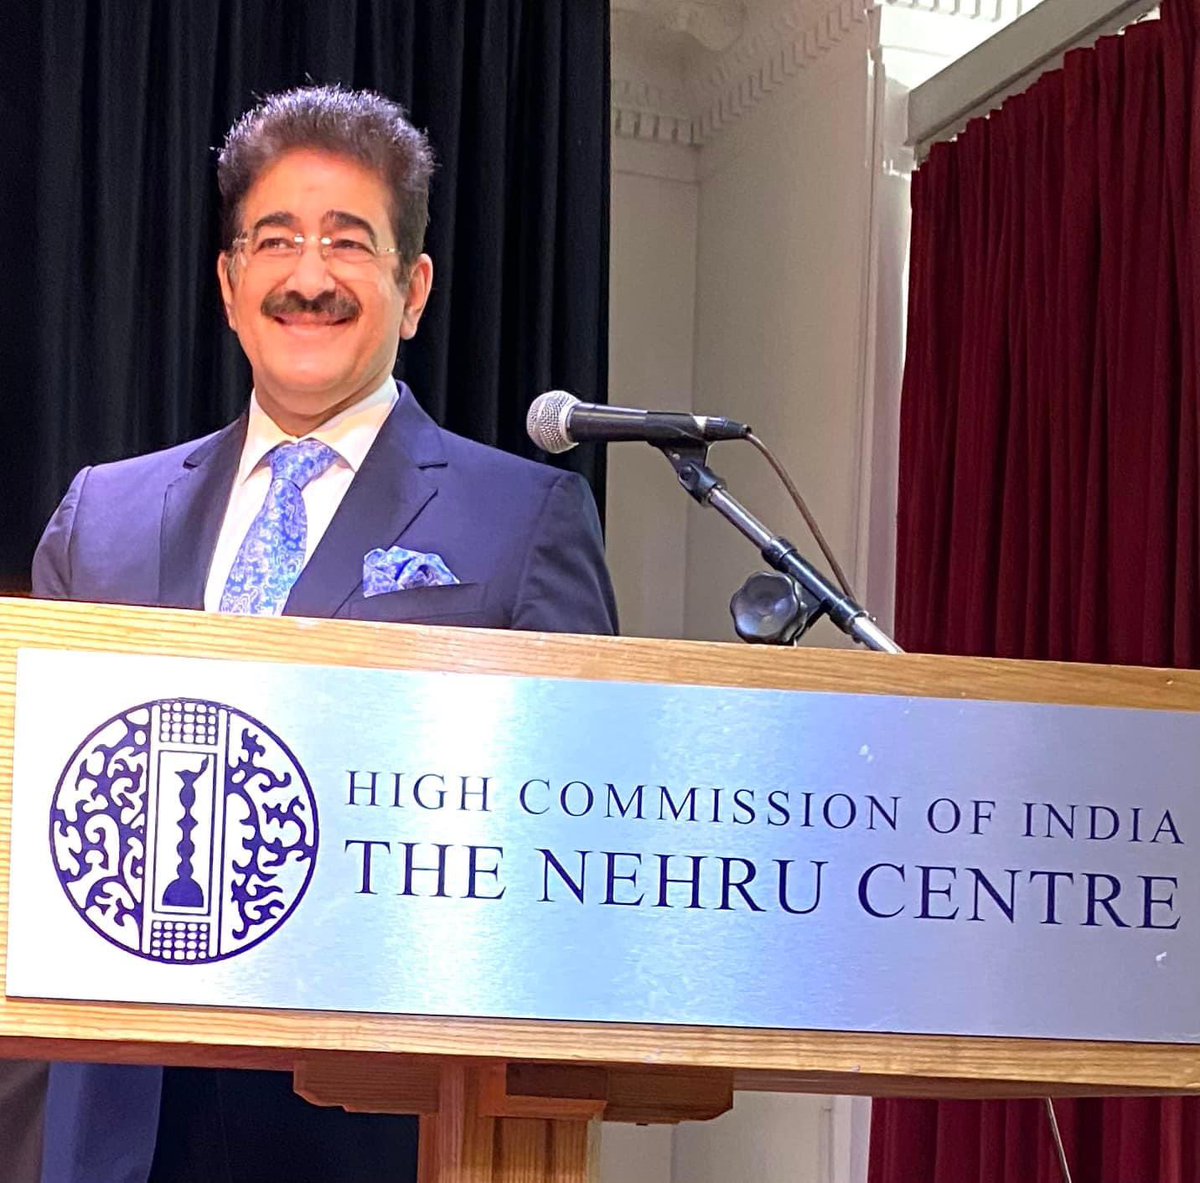 Addressed at Nehru Centre London on the Celebration of 75 Years of India’s Independence-“Sankalp Se Samridhi Tak”-Indo UK Film and Cultural Forum #addressed #nehrucentre #london #celebration #75yearsofindependence #sankalpsesamridhitak #indouk #filmandculturalforum